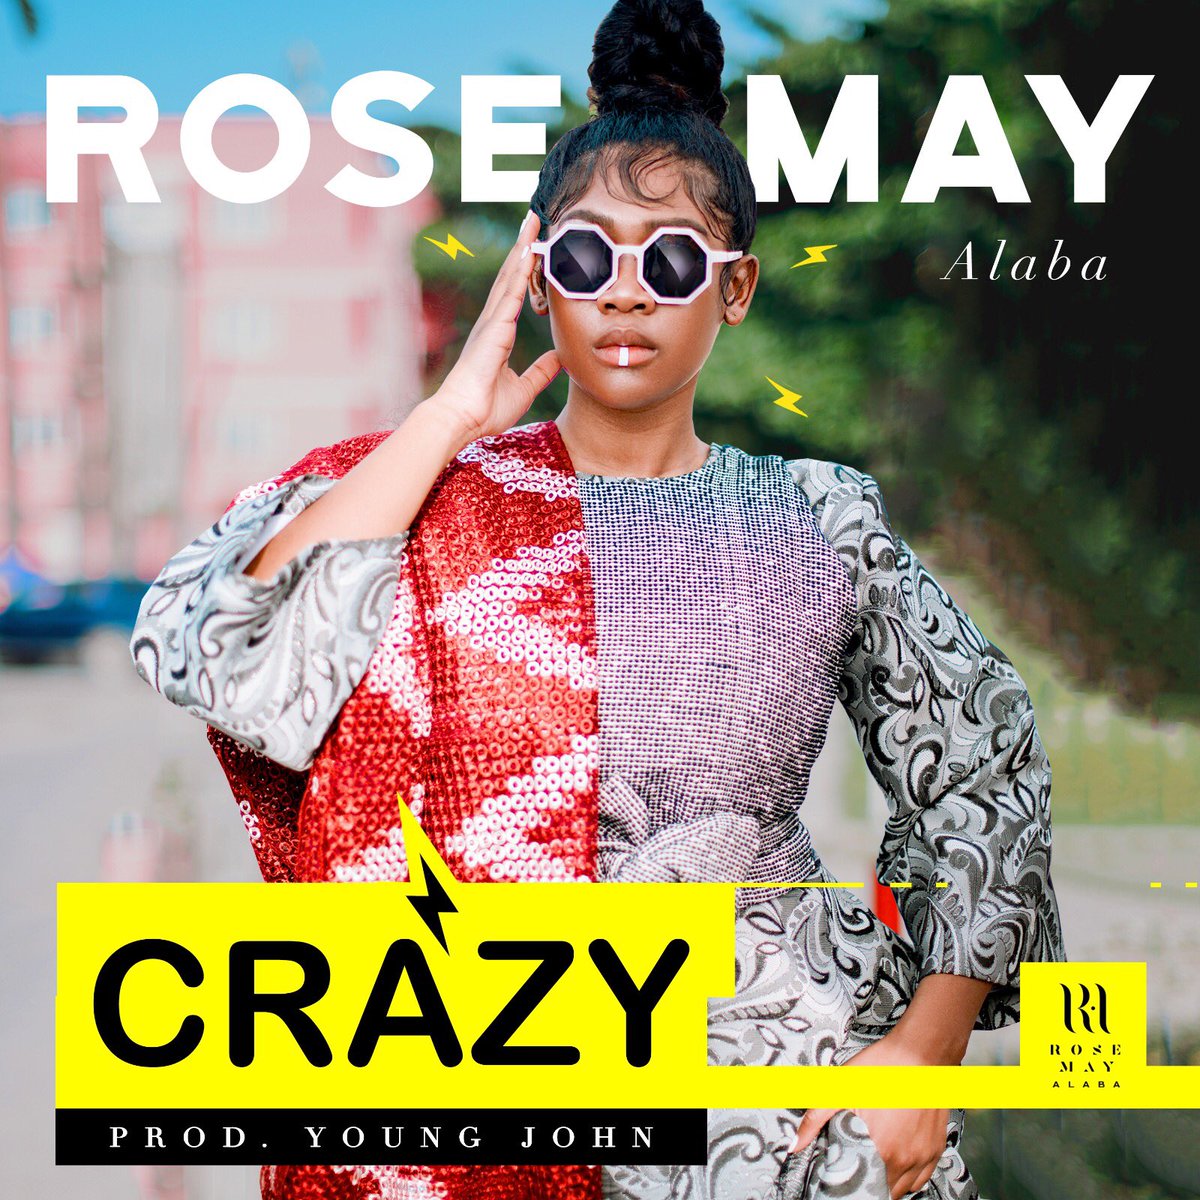 My friend  @RoseMayAlaba released a new piece of music last weekend. I was honored to shoot the cover.  #CrazybyRoseMayAlaba